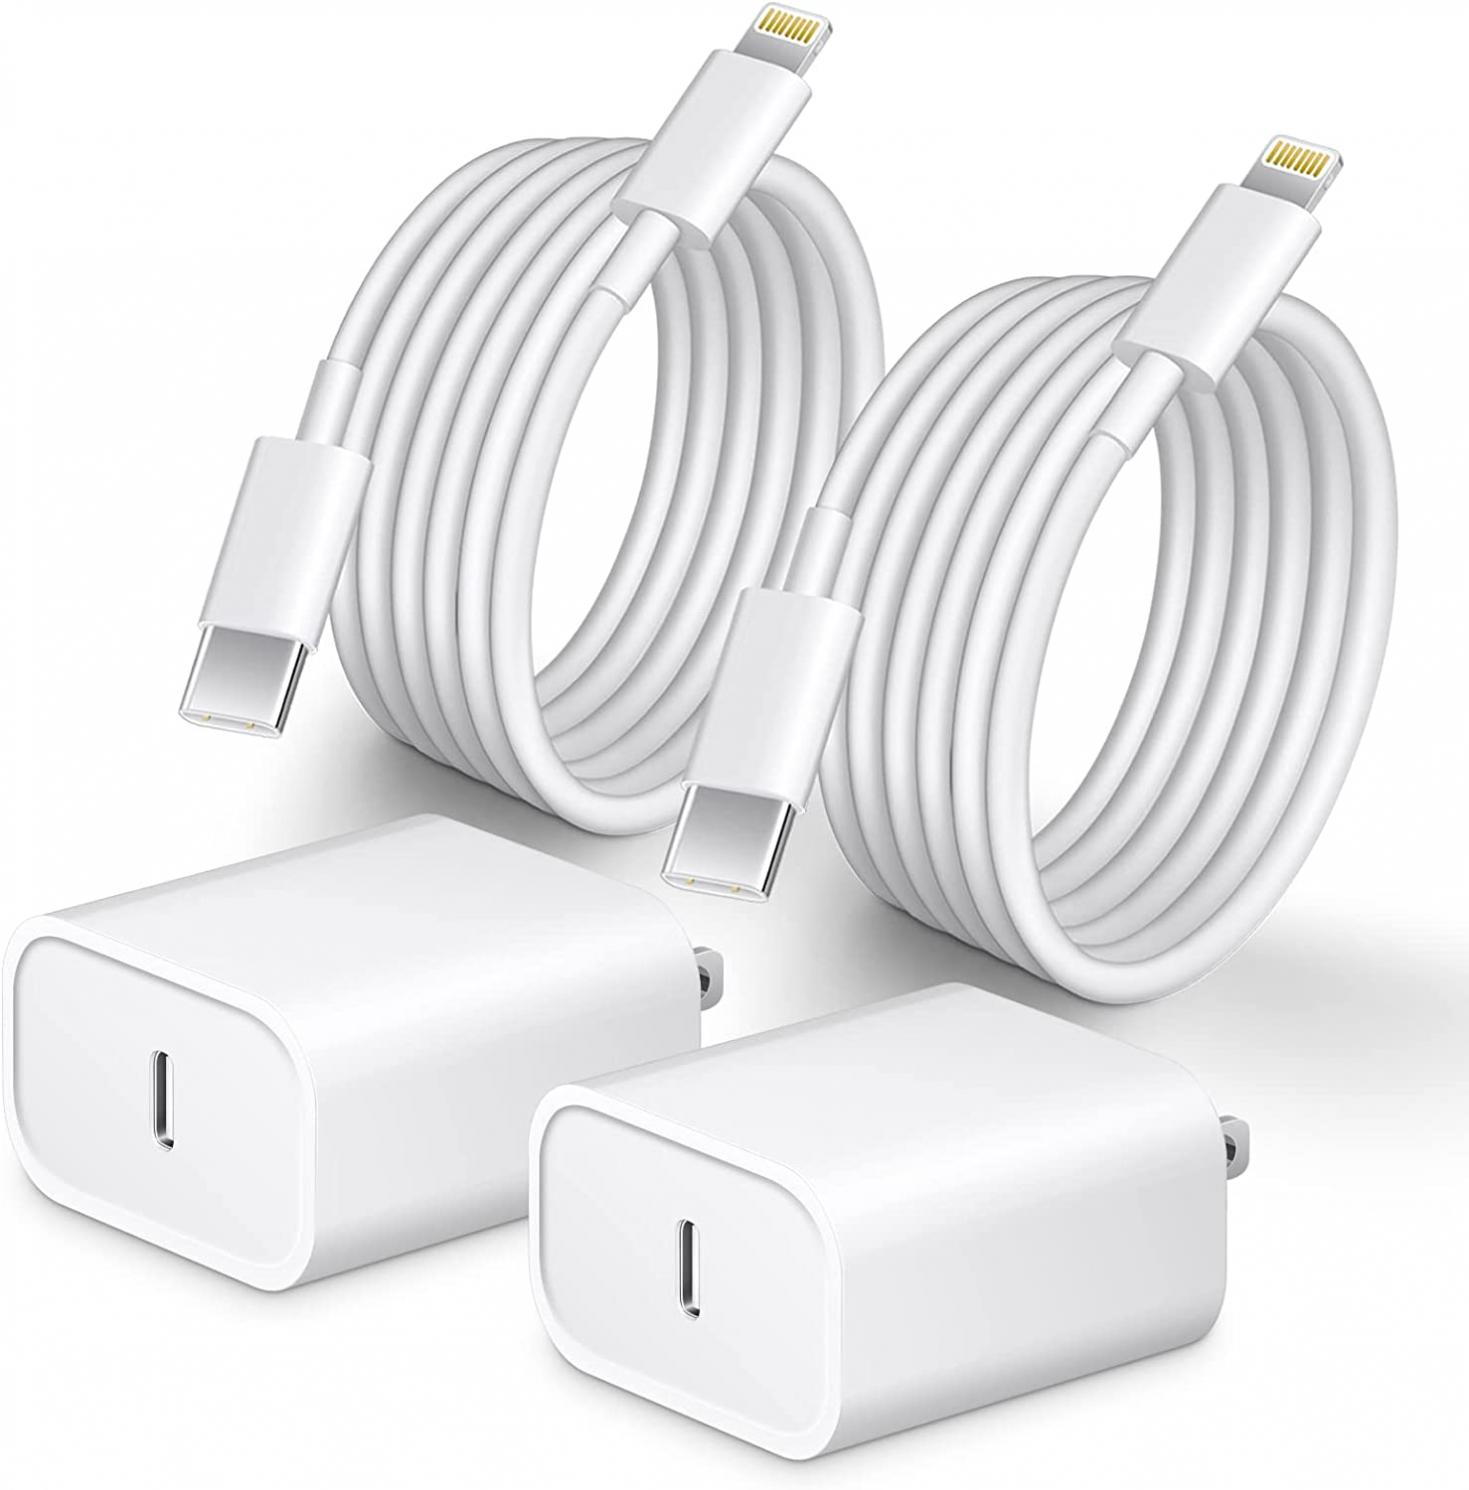 iPhone 14 13 12 Fast Charger [Apple MFi Certified] 10FT Type C Charger 2 Pack 20W USB C Charger Block with Fast Charging Cable for iPhone 14/14 Pro/13/13Pro Max/12/12 Pro Max/11/XS/XR/X/8Plus,iPad